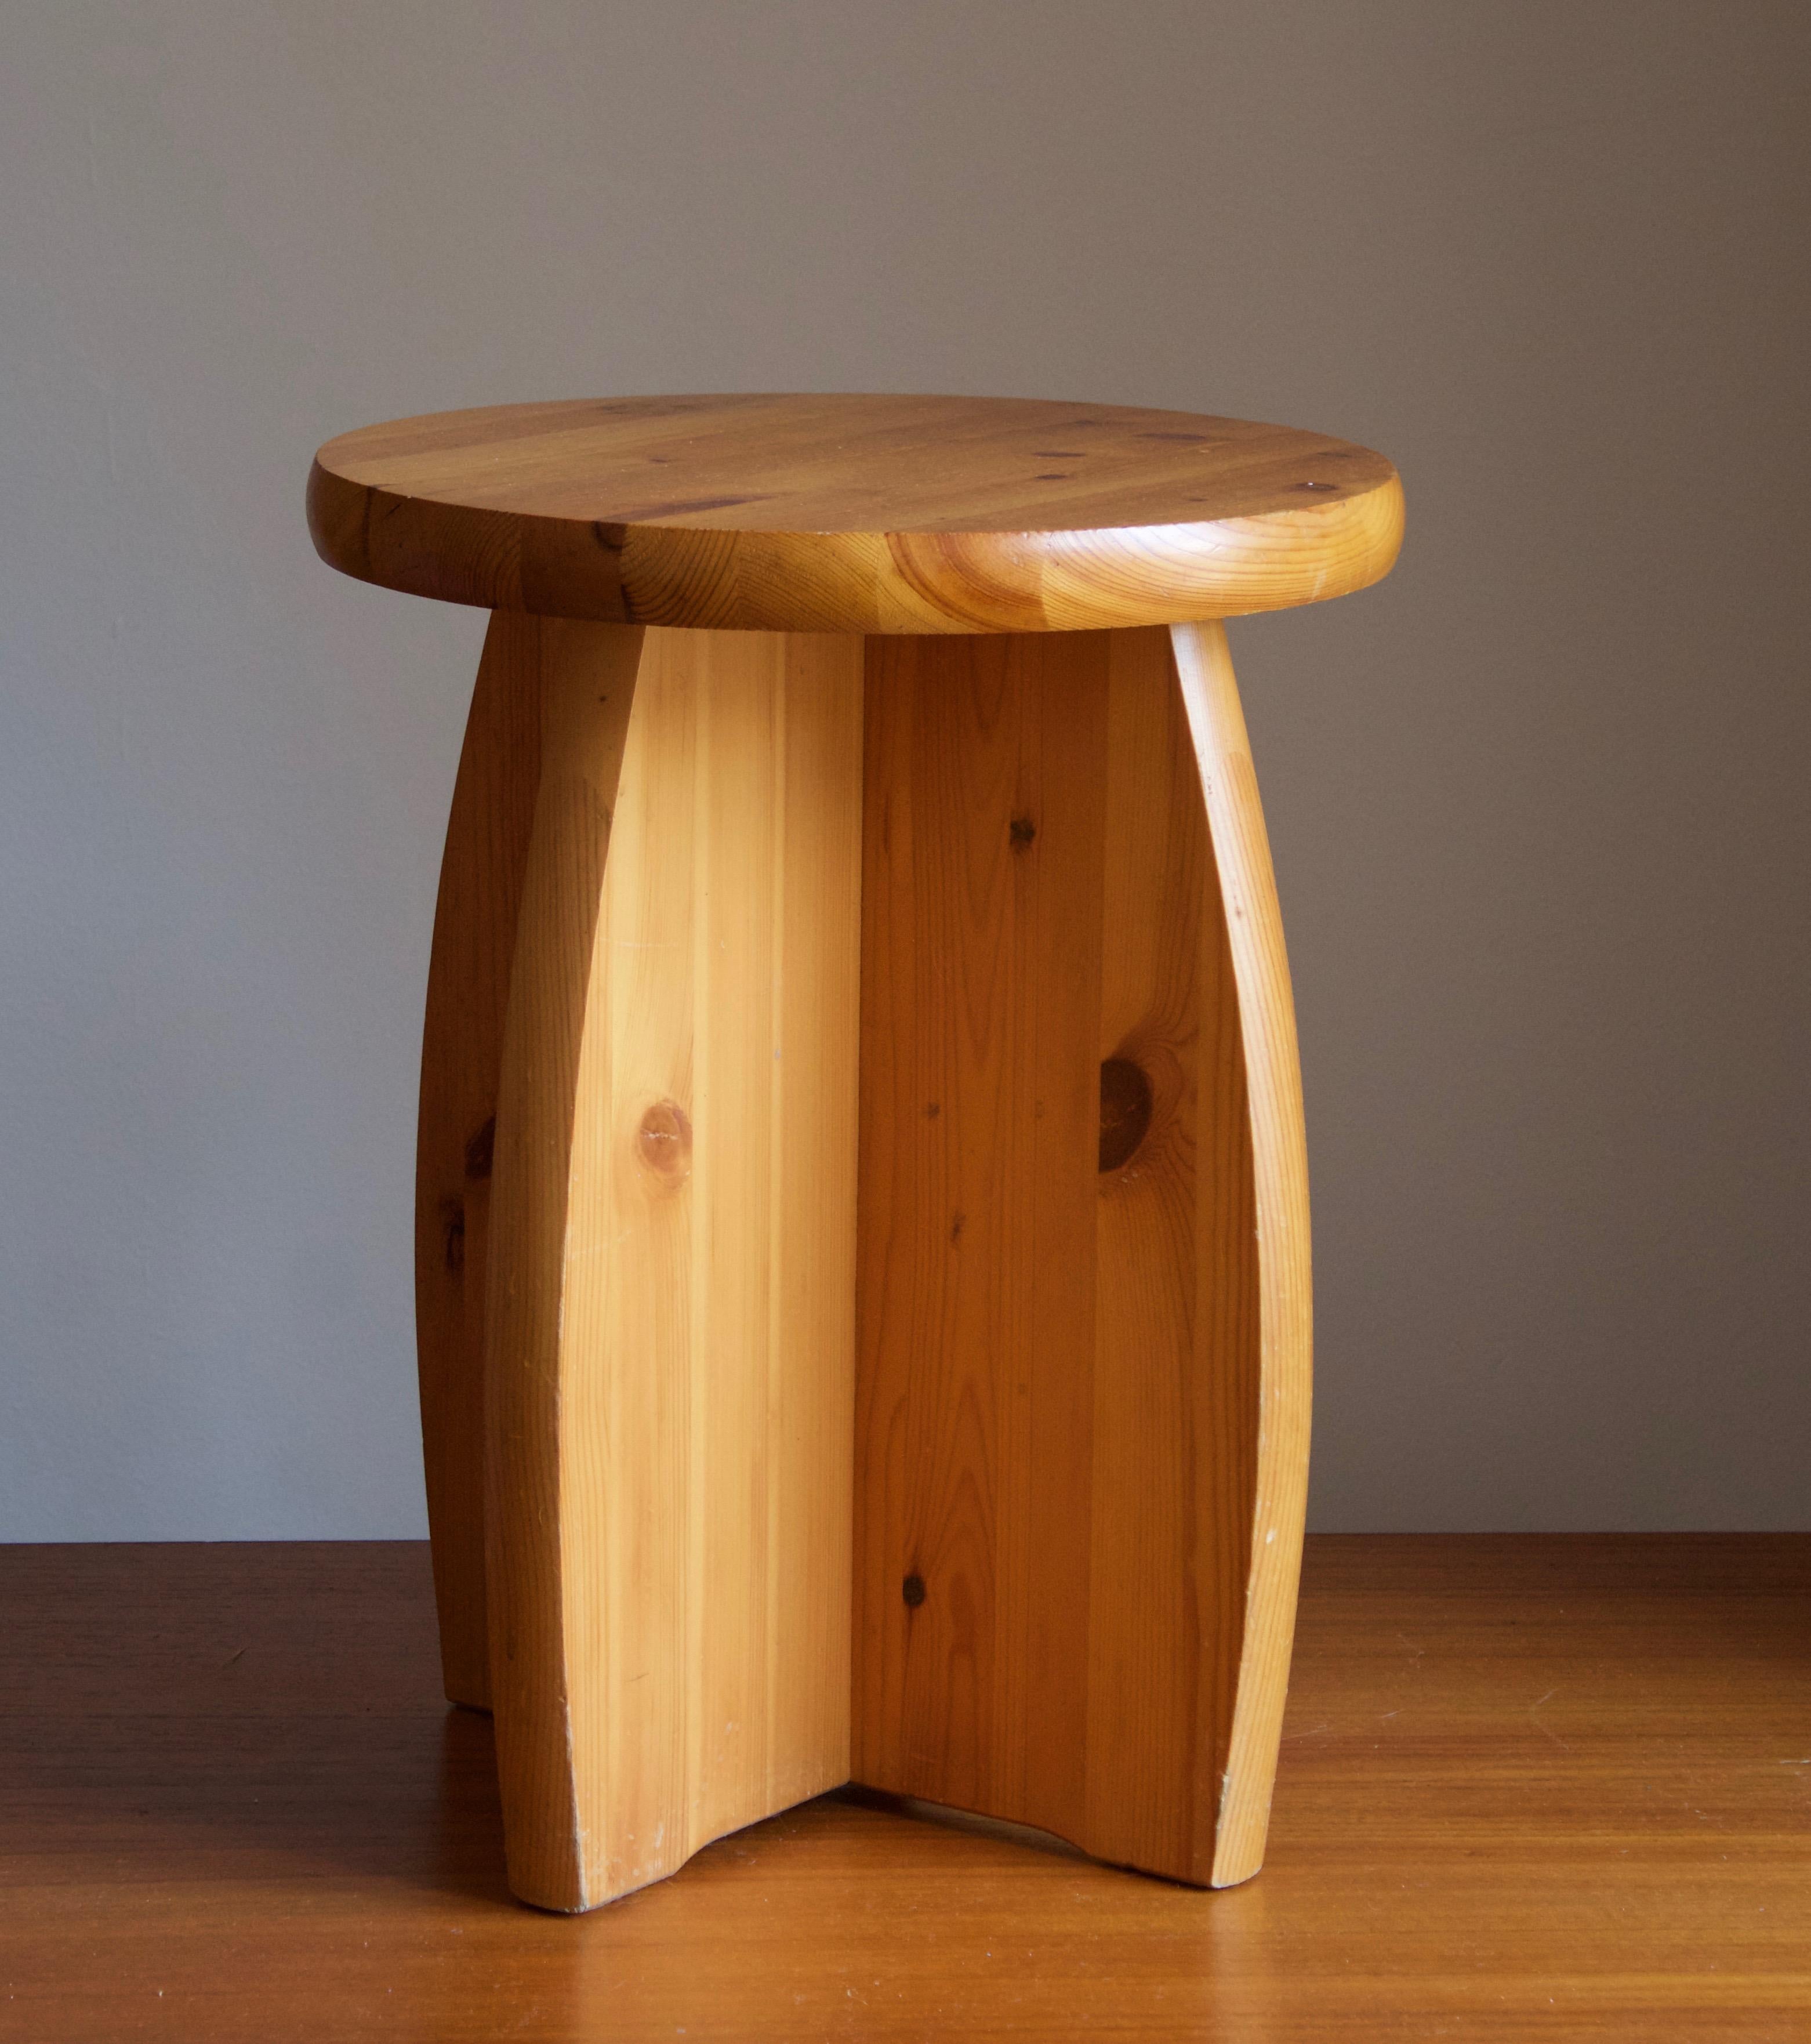 A Swedish pinewood stool or side table. By unknown designer, 1970s.





